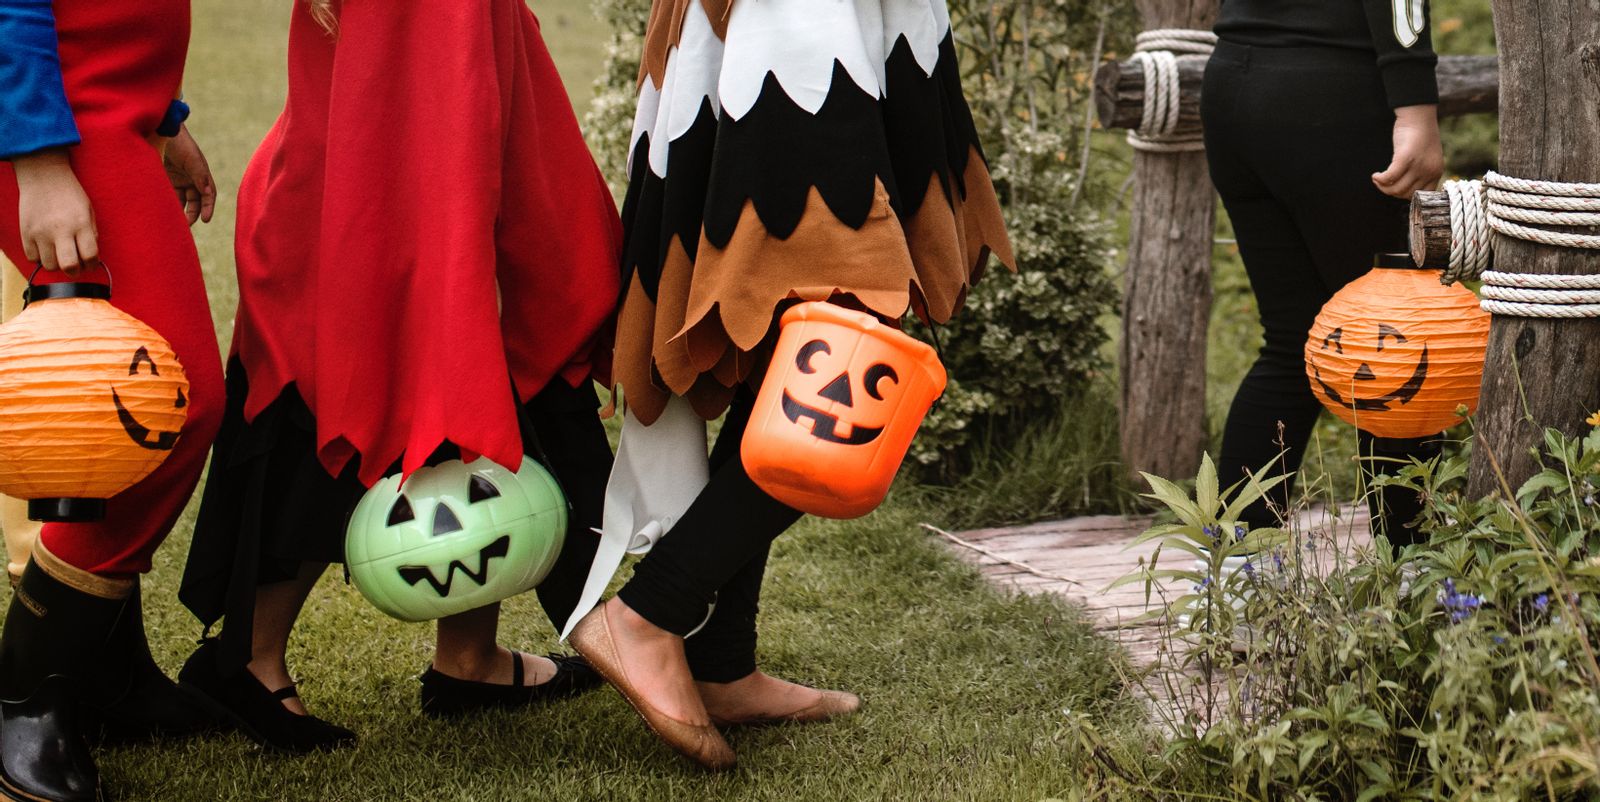 Halloween safety: Tips for families